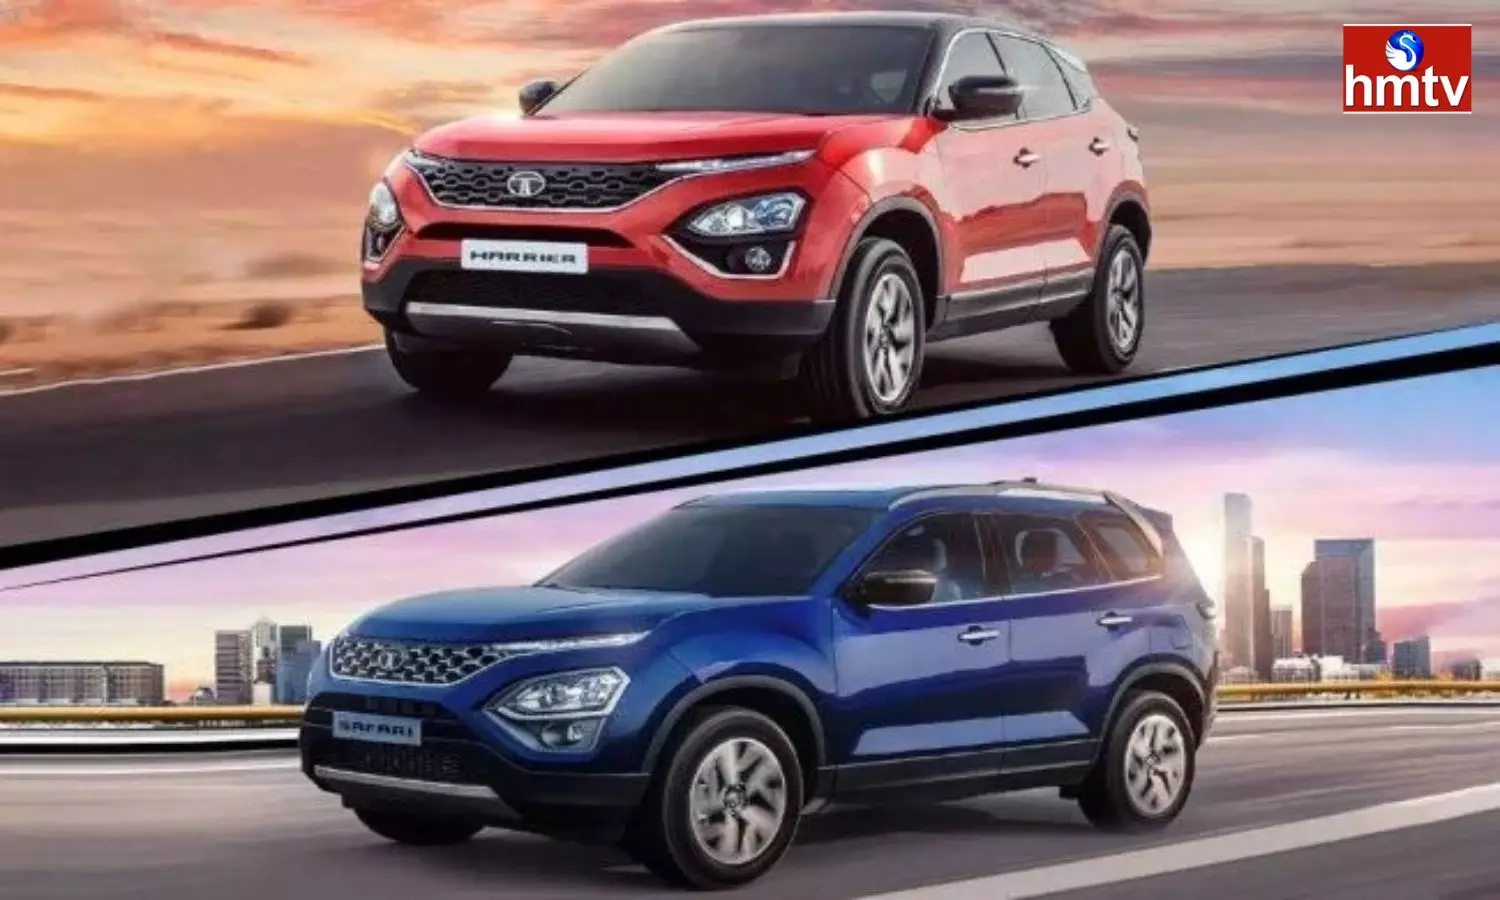 New Generation Tata Harrier And Safari Launched In India With 16 Kmpl And 7 Safety Features Like Airbags